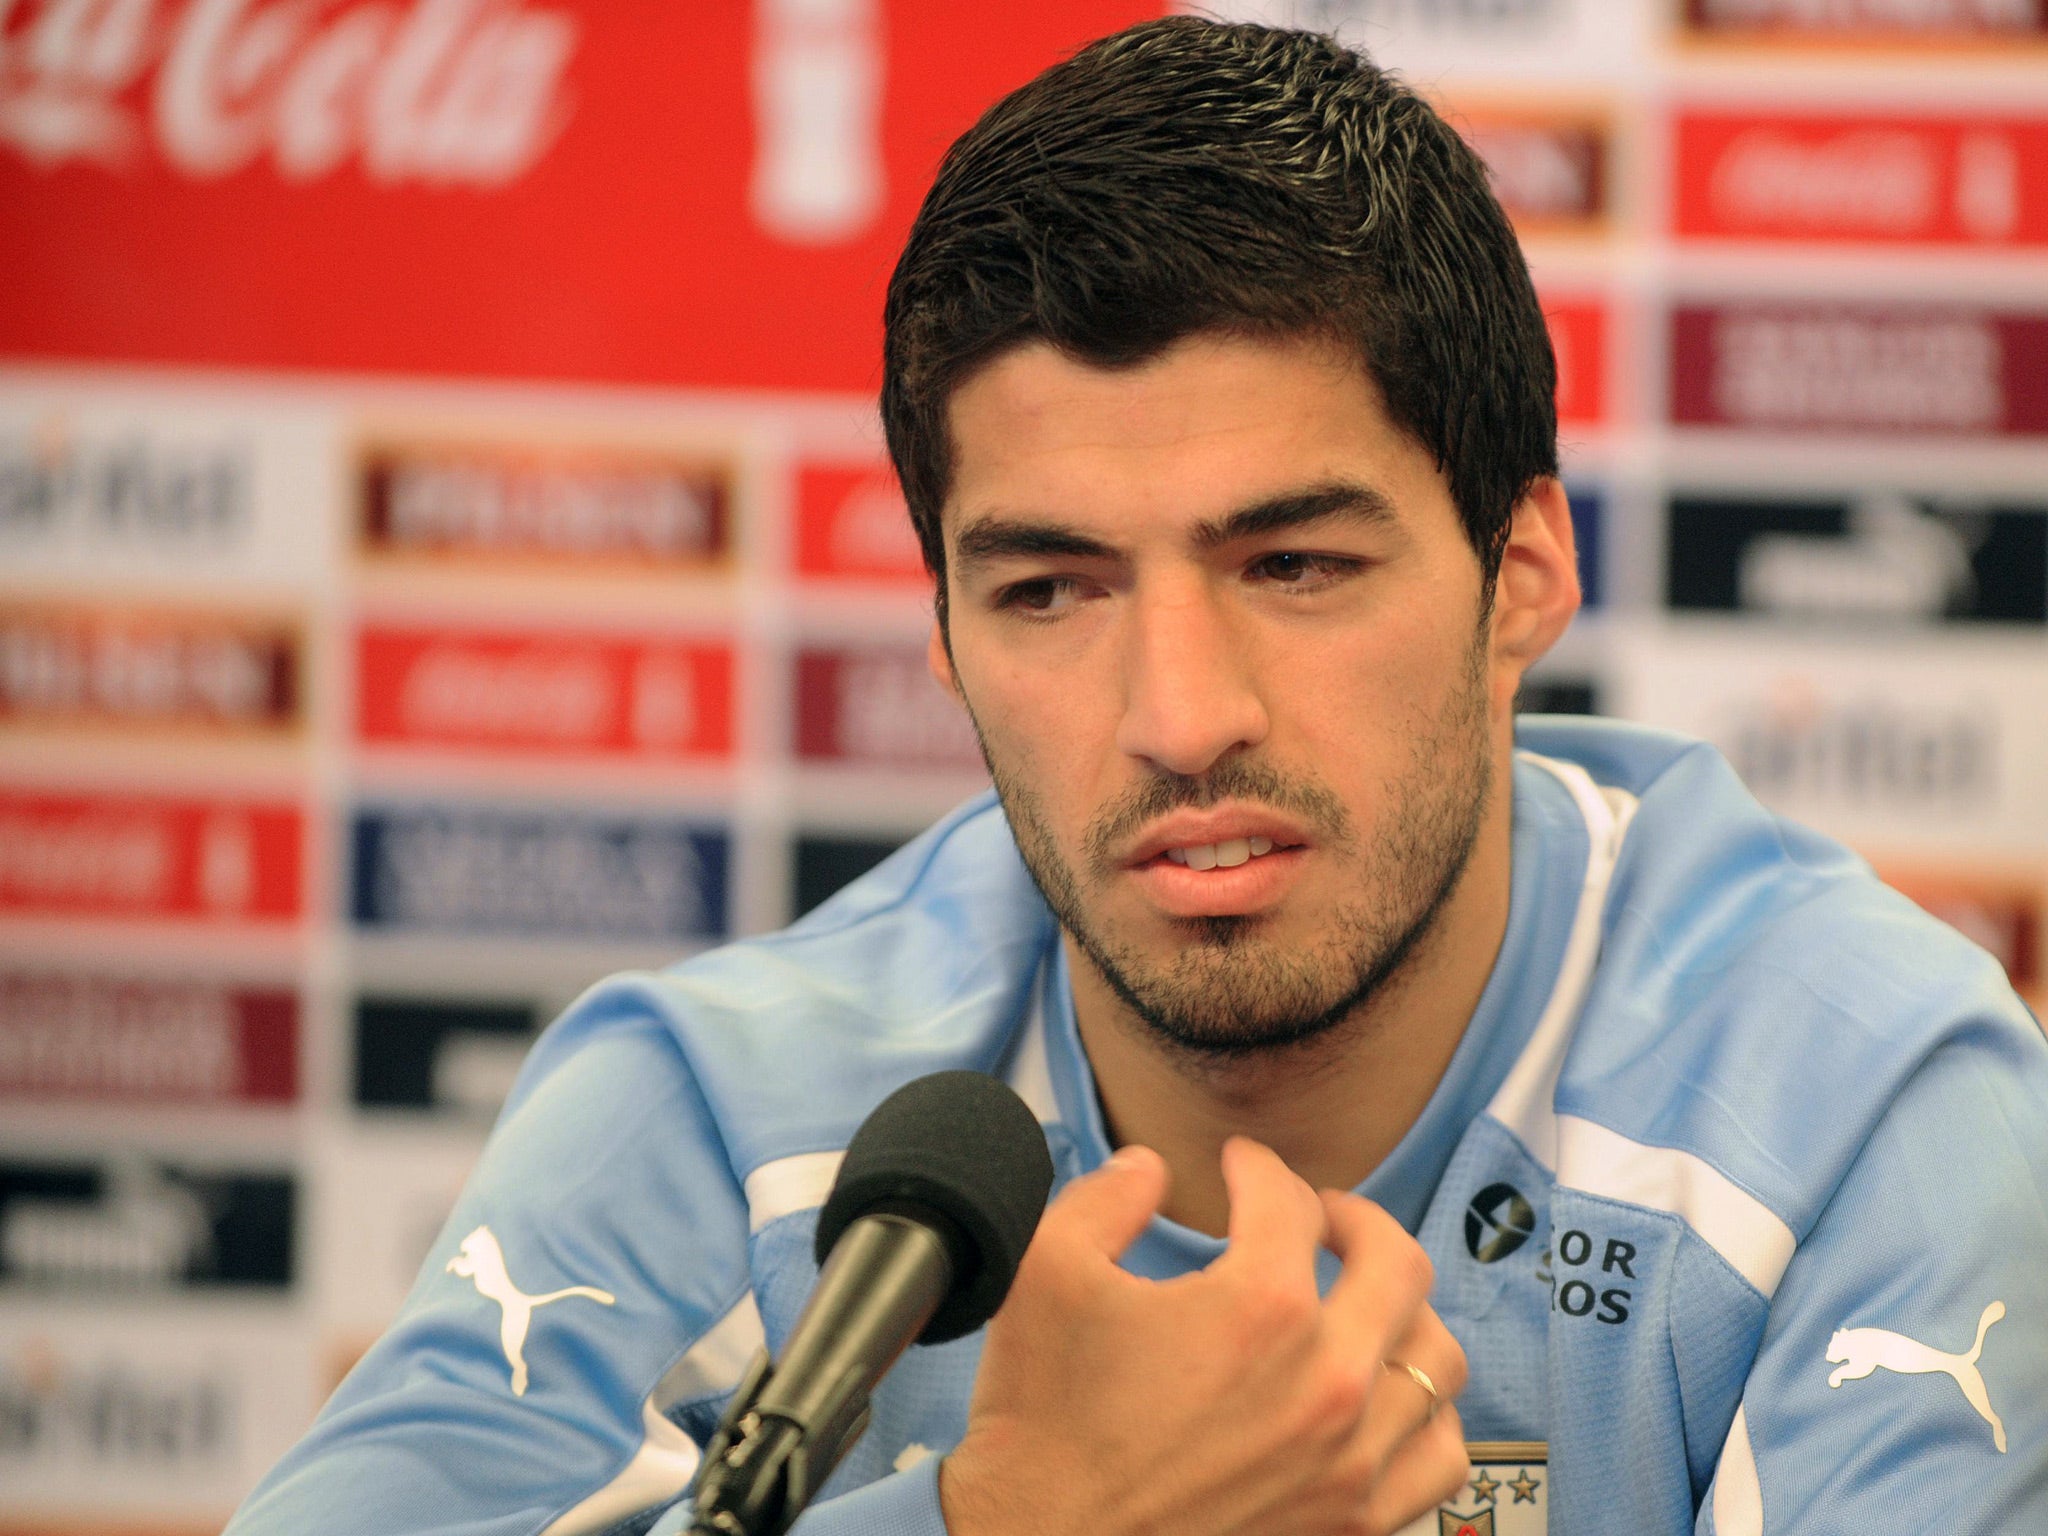 May 2013: After days of hints over an exit, during a press conference in Uruguay Suarez confirms he wishes to leave Liverpool, blaming press intrusion for he desire to go.